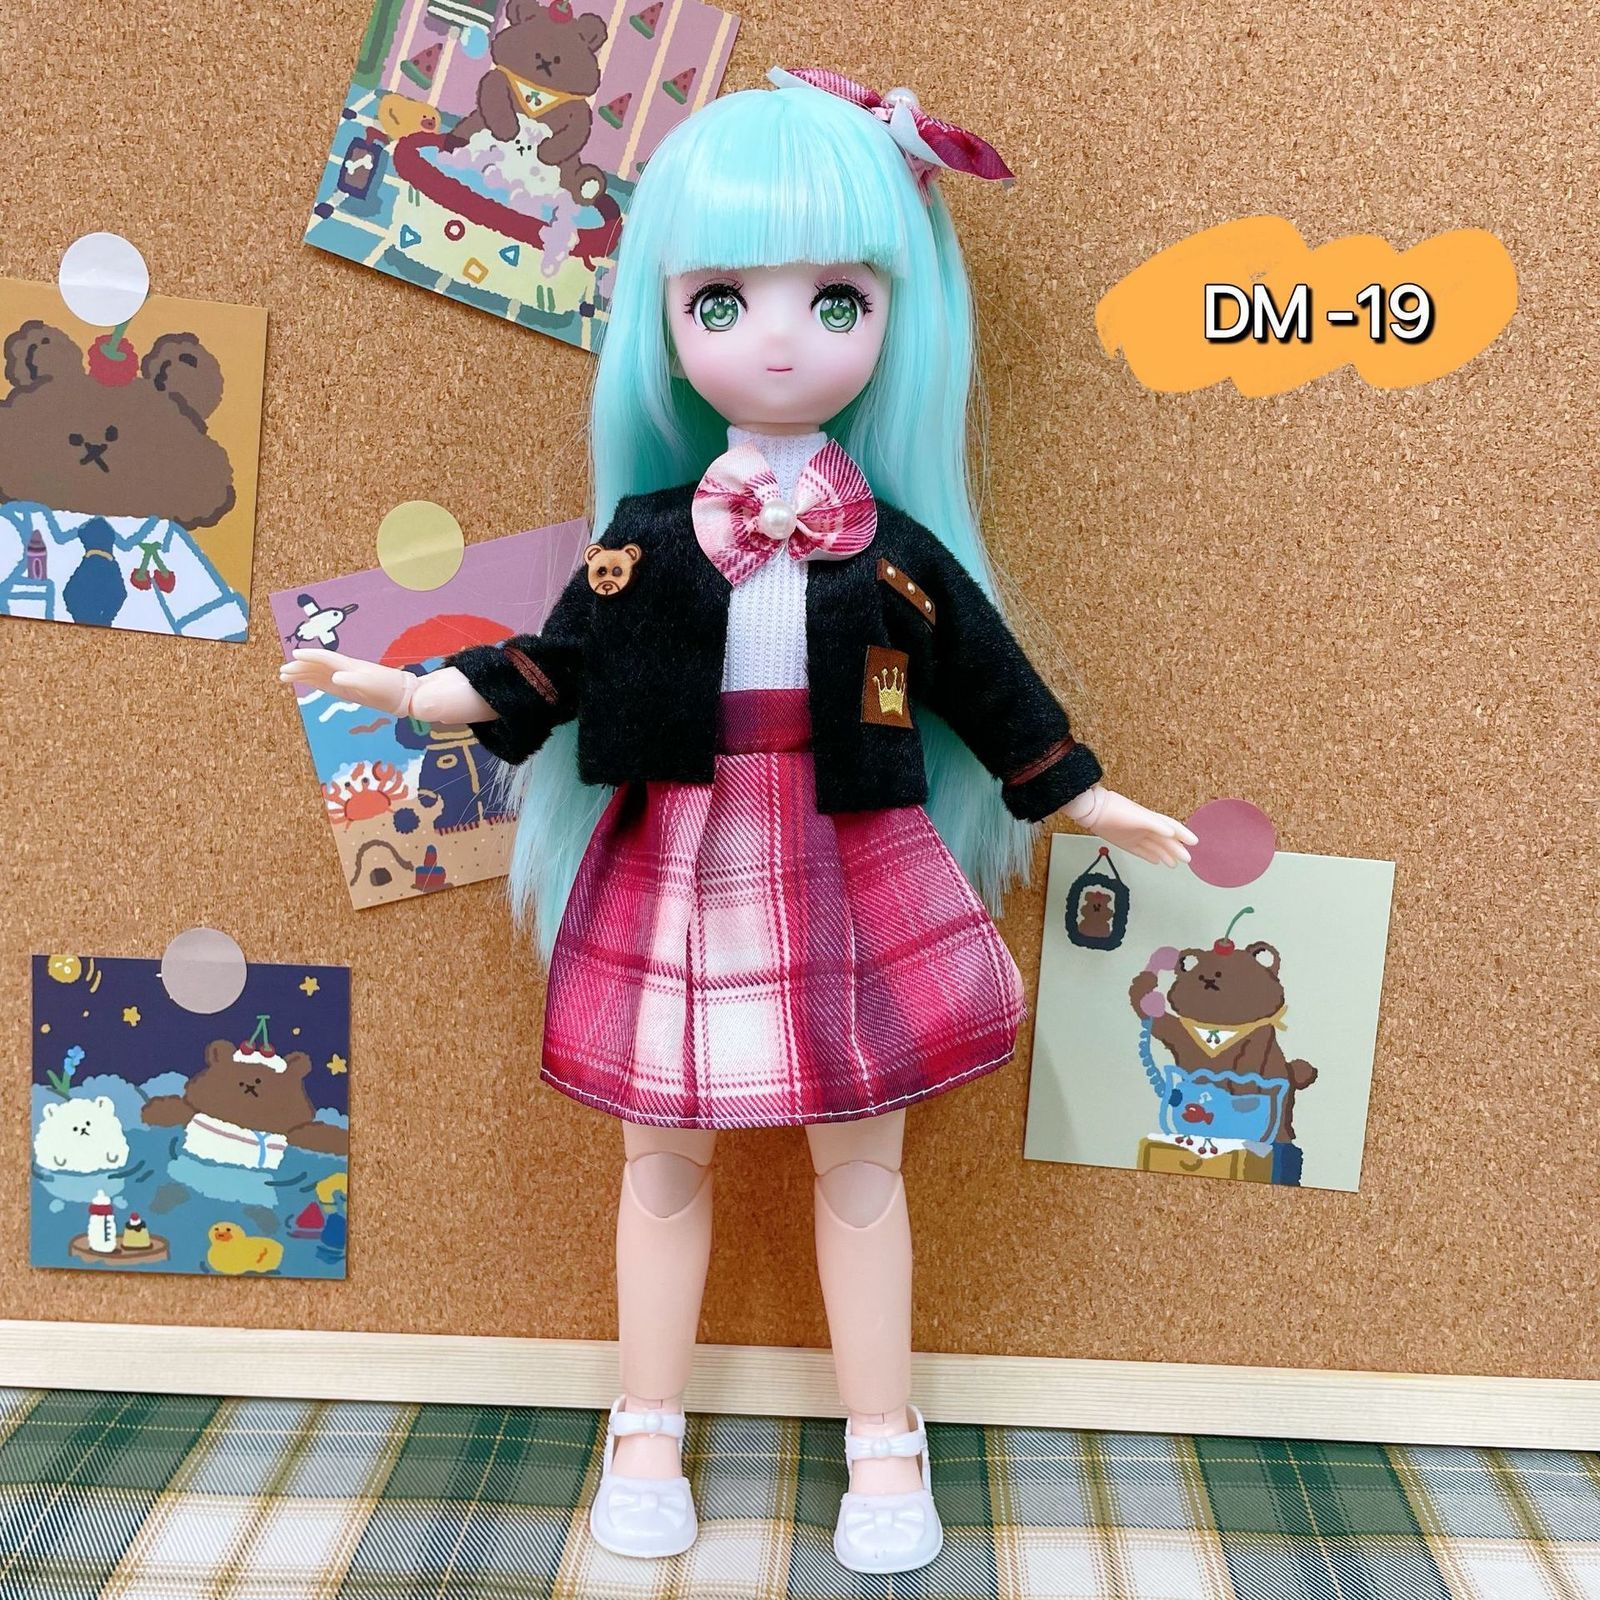 Dm-19-Doll with Clothes